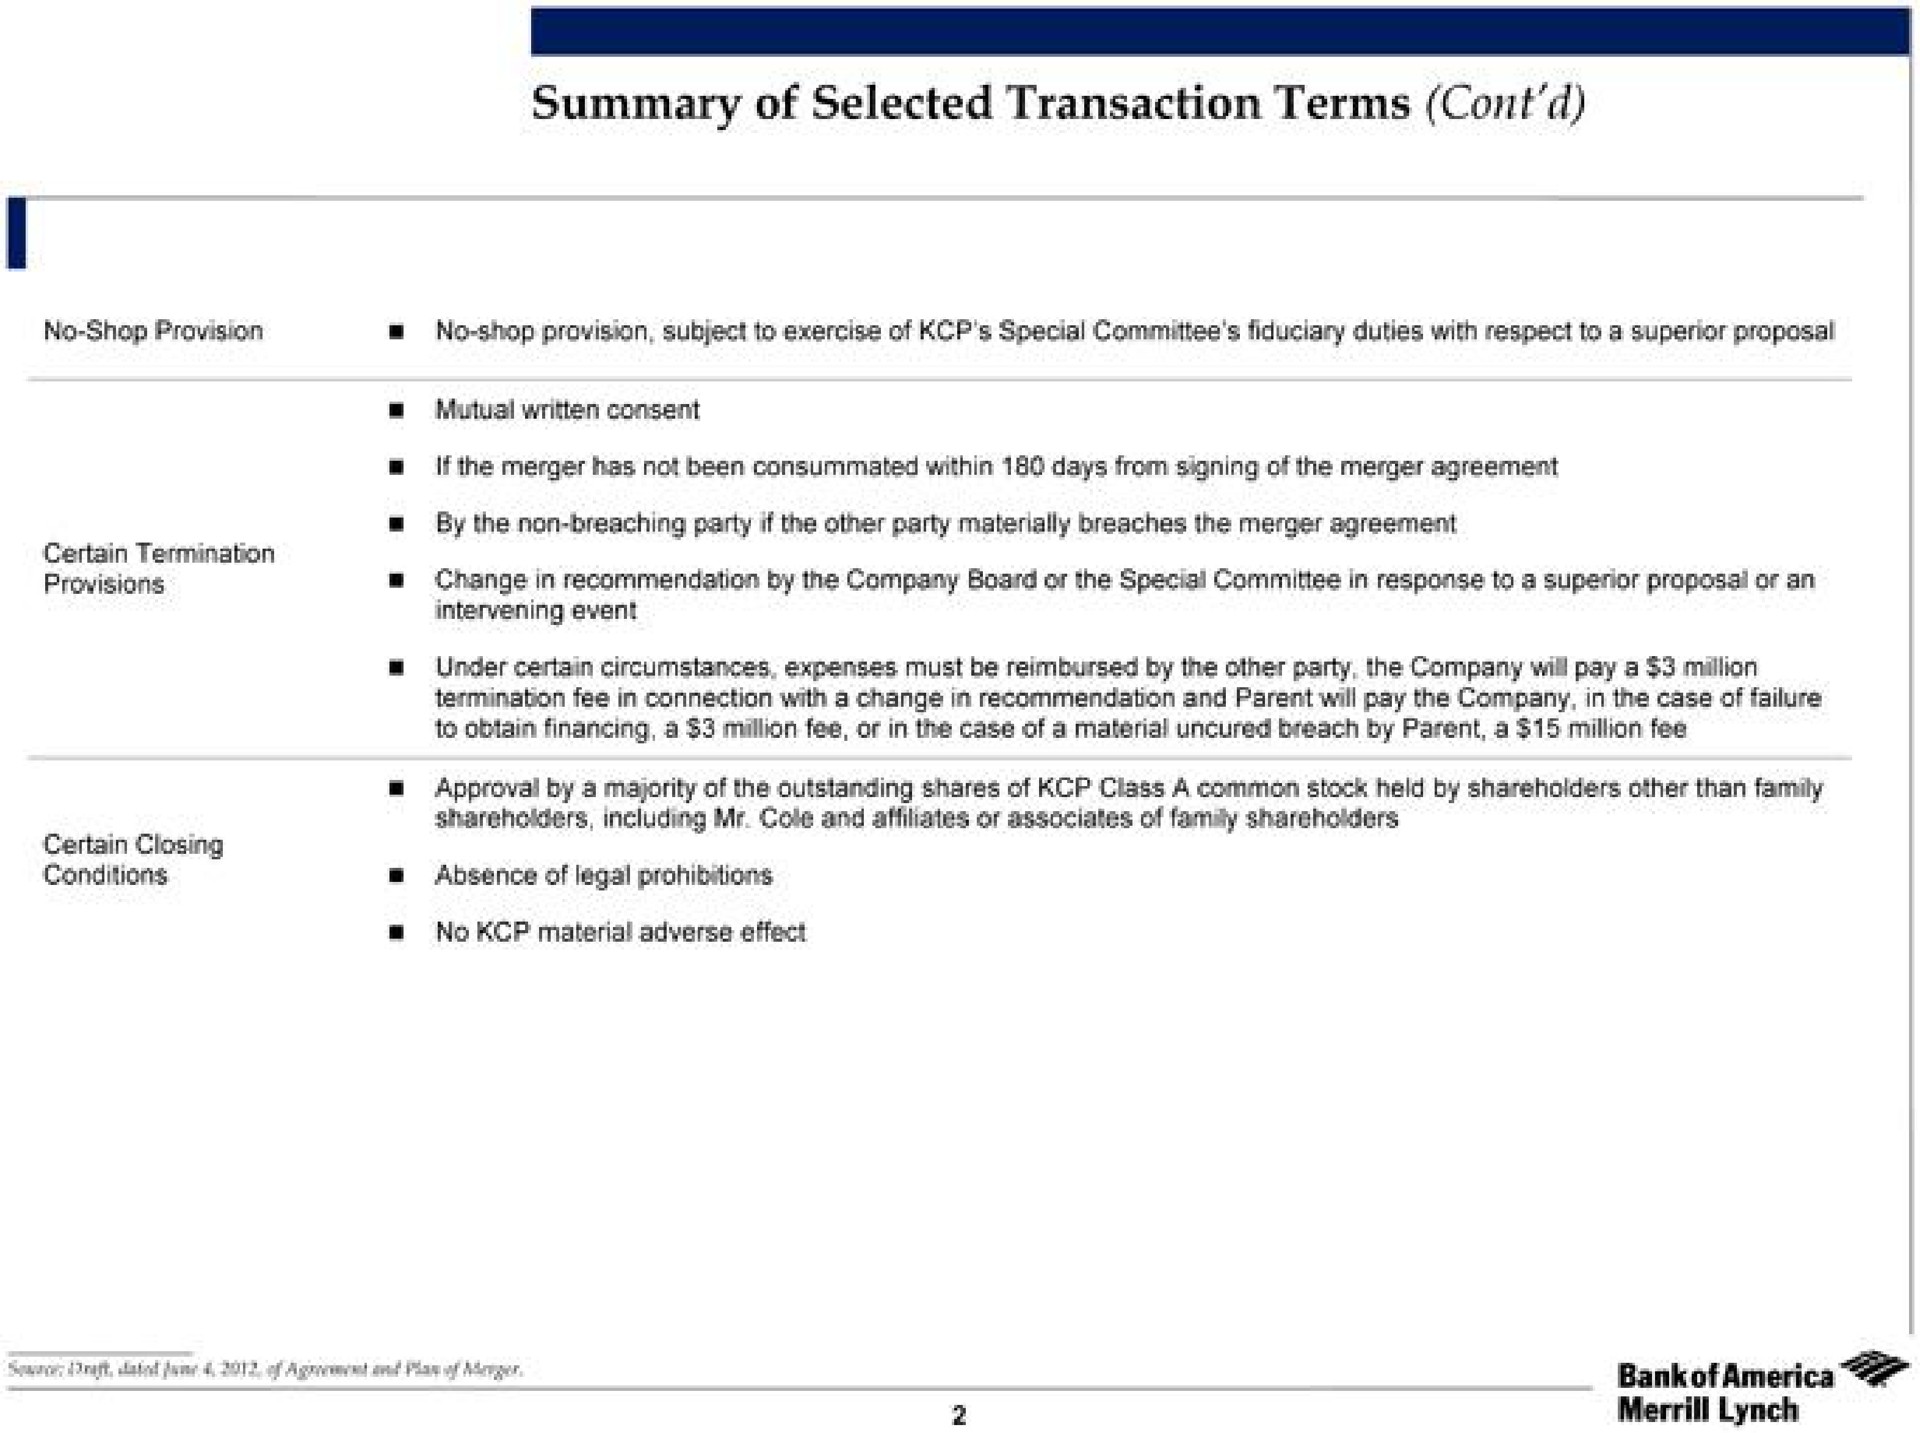 summary of selected transaction terms | Bank of America